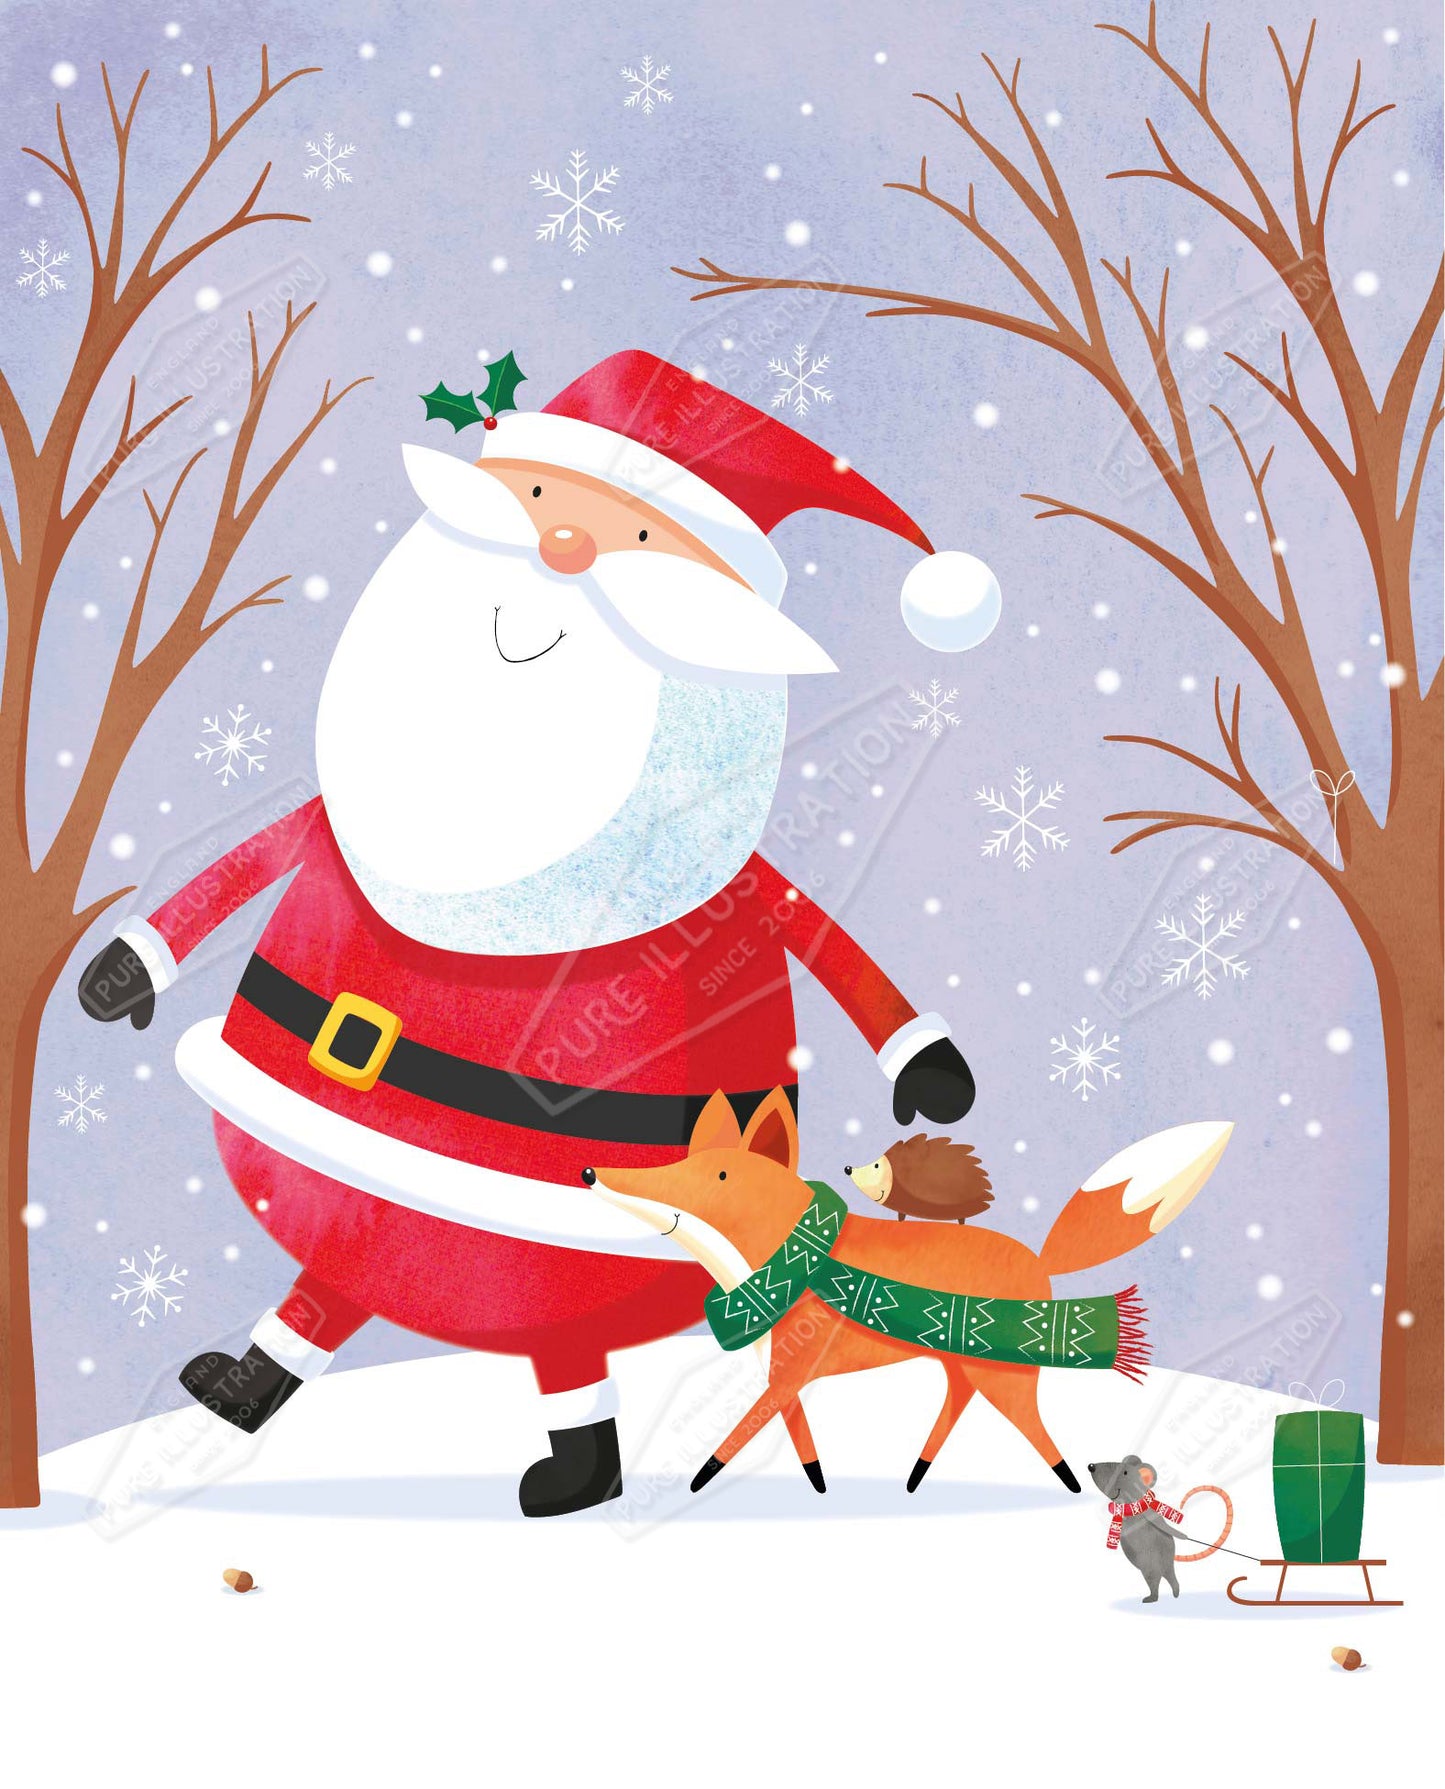 00035108SPI- Sarah Pitt is represented by Pure Art Licensing Agency - Christmas Greeting Card Design